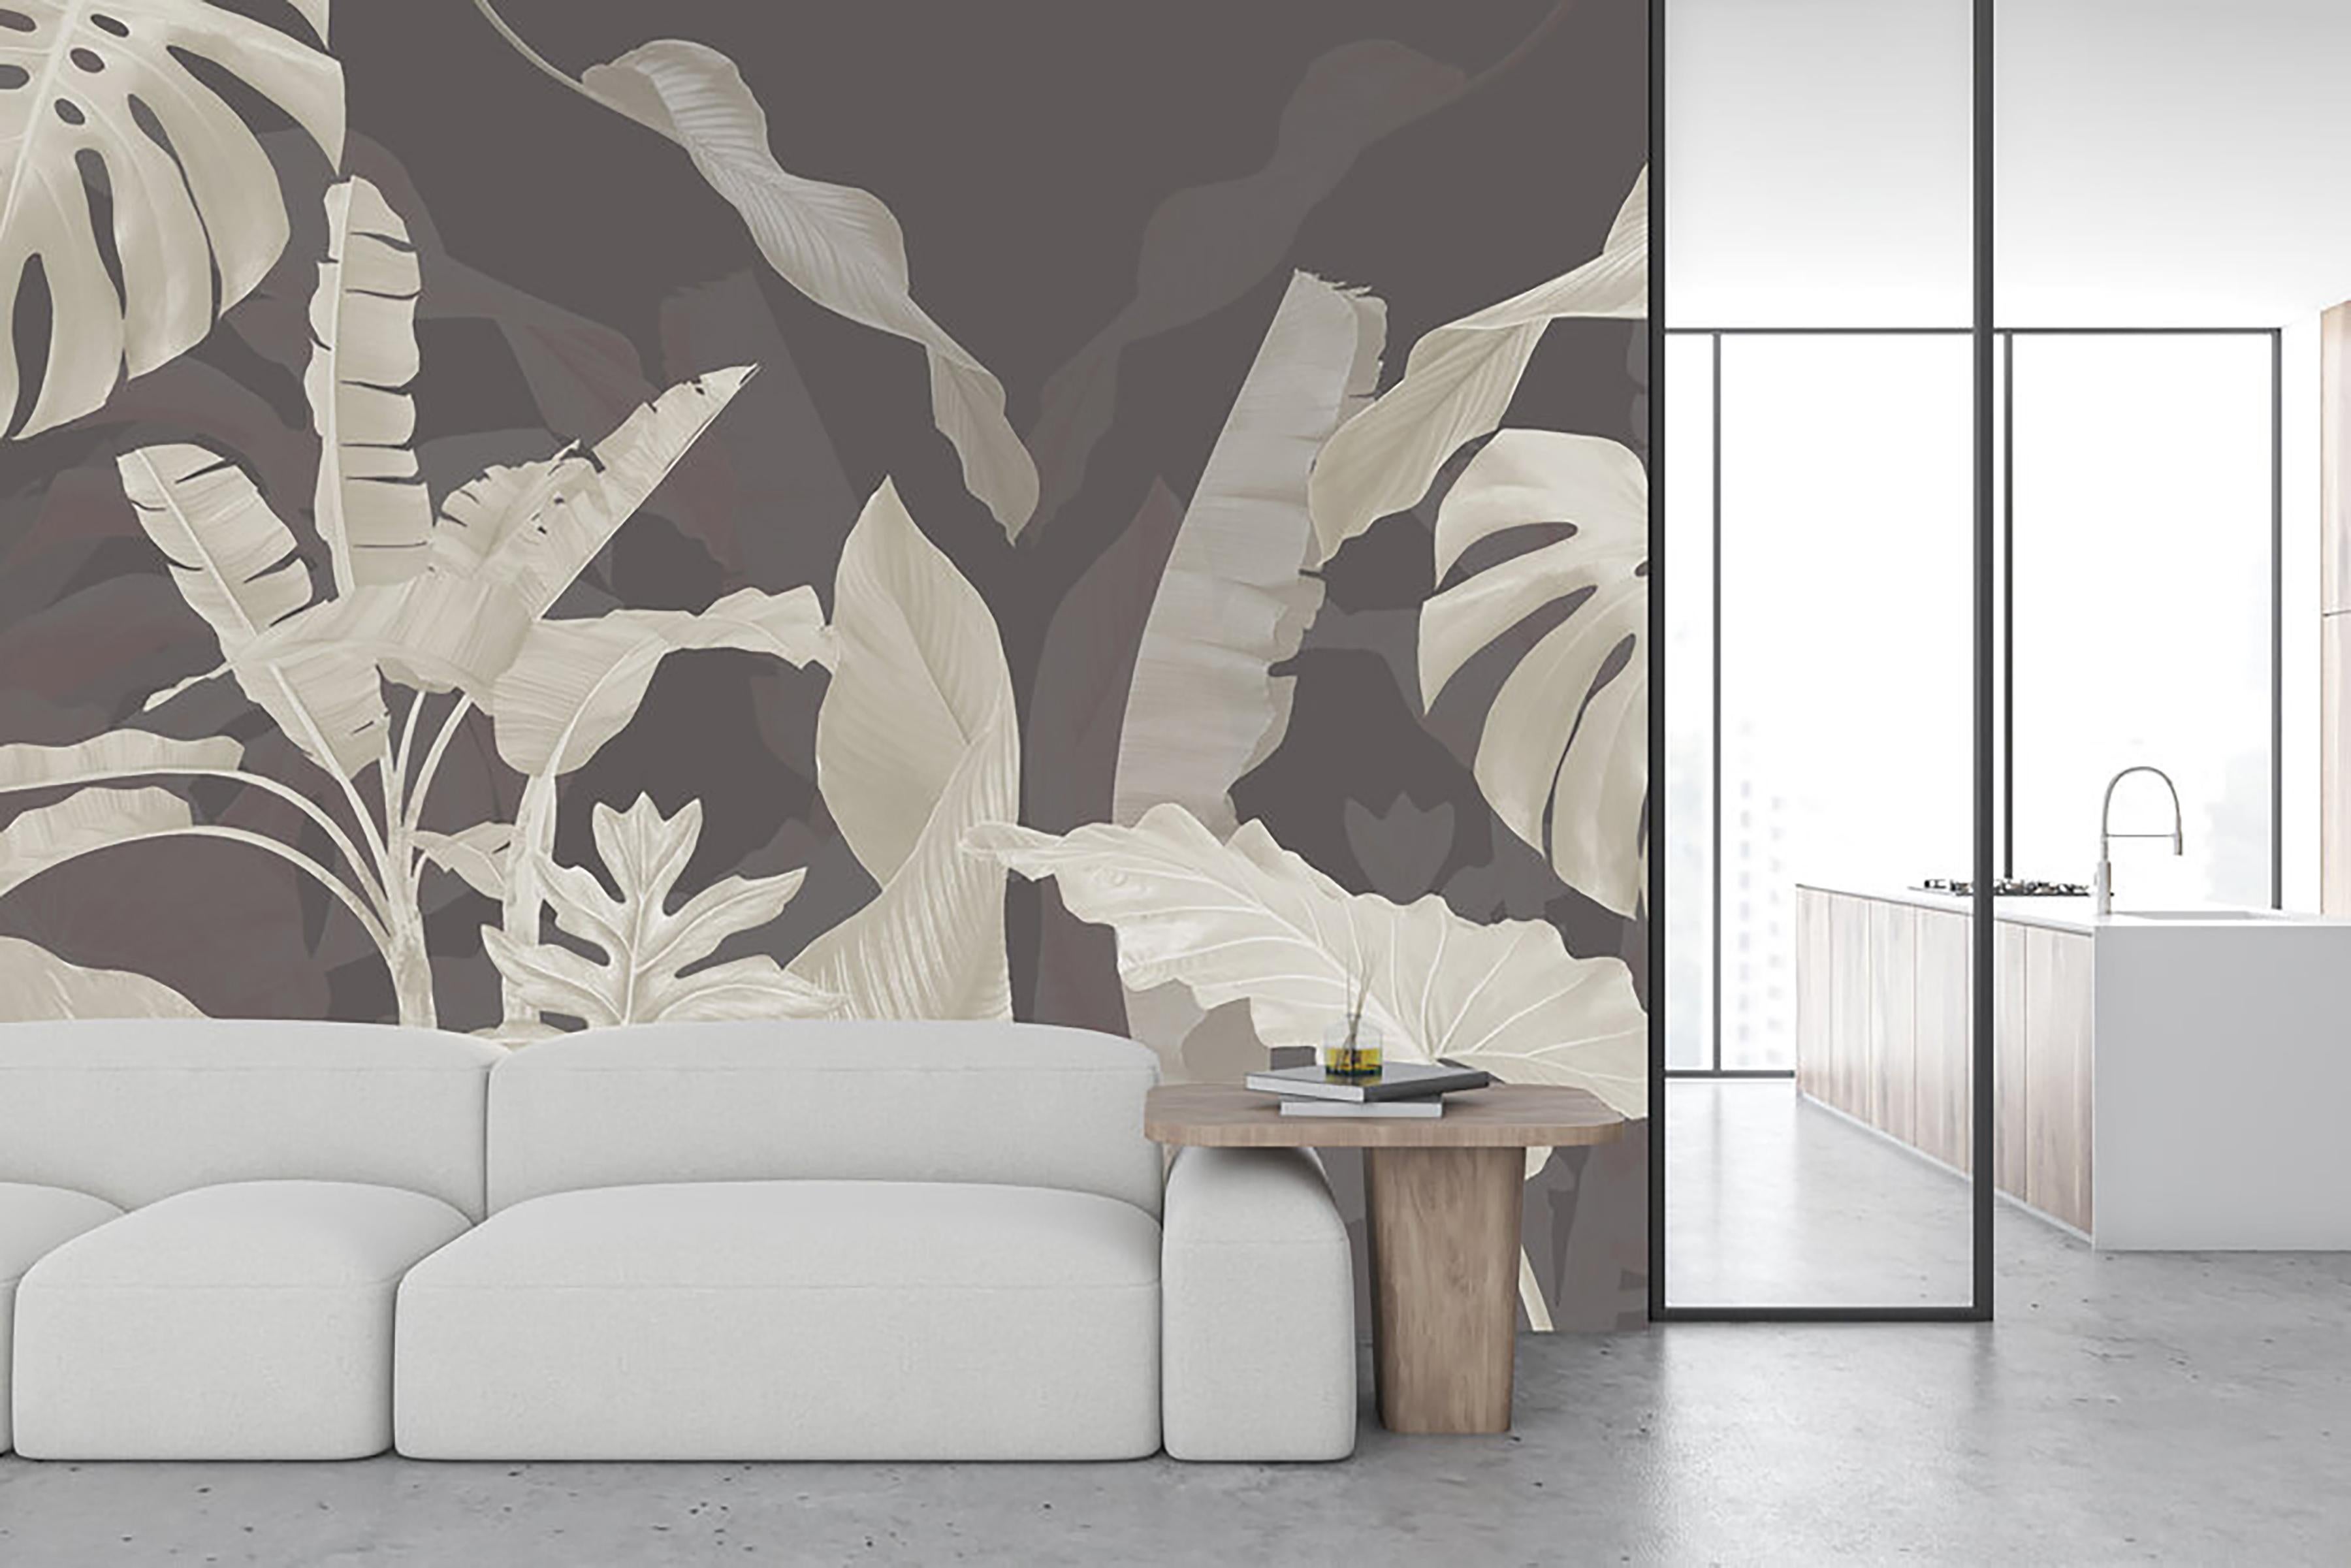 Introducing..... JungleScape by EDGE Collections. 

A whimsical nod to endless Summers and the foliage of our chosen Miami home. JungleScape pays homage to the classic prints of yesteryear, while serving a tropical modernist flair. 

As light